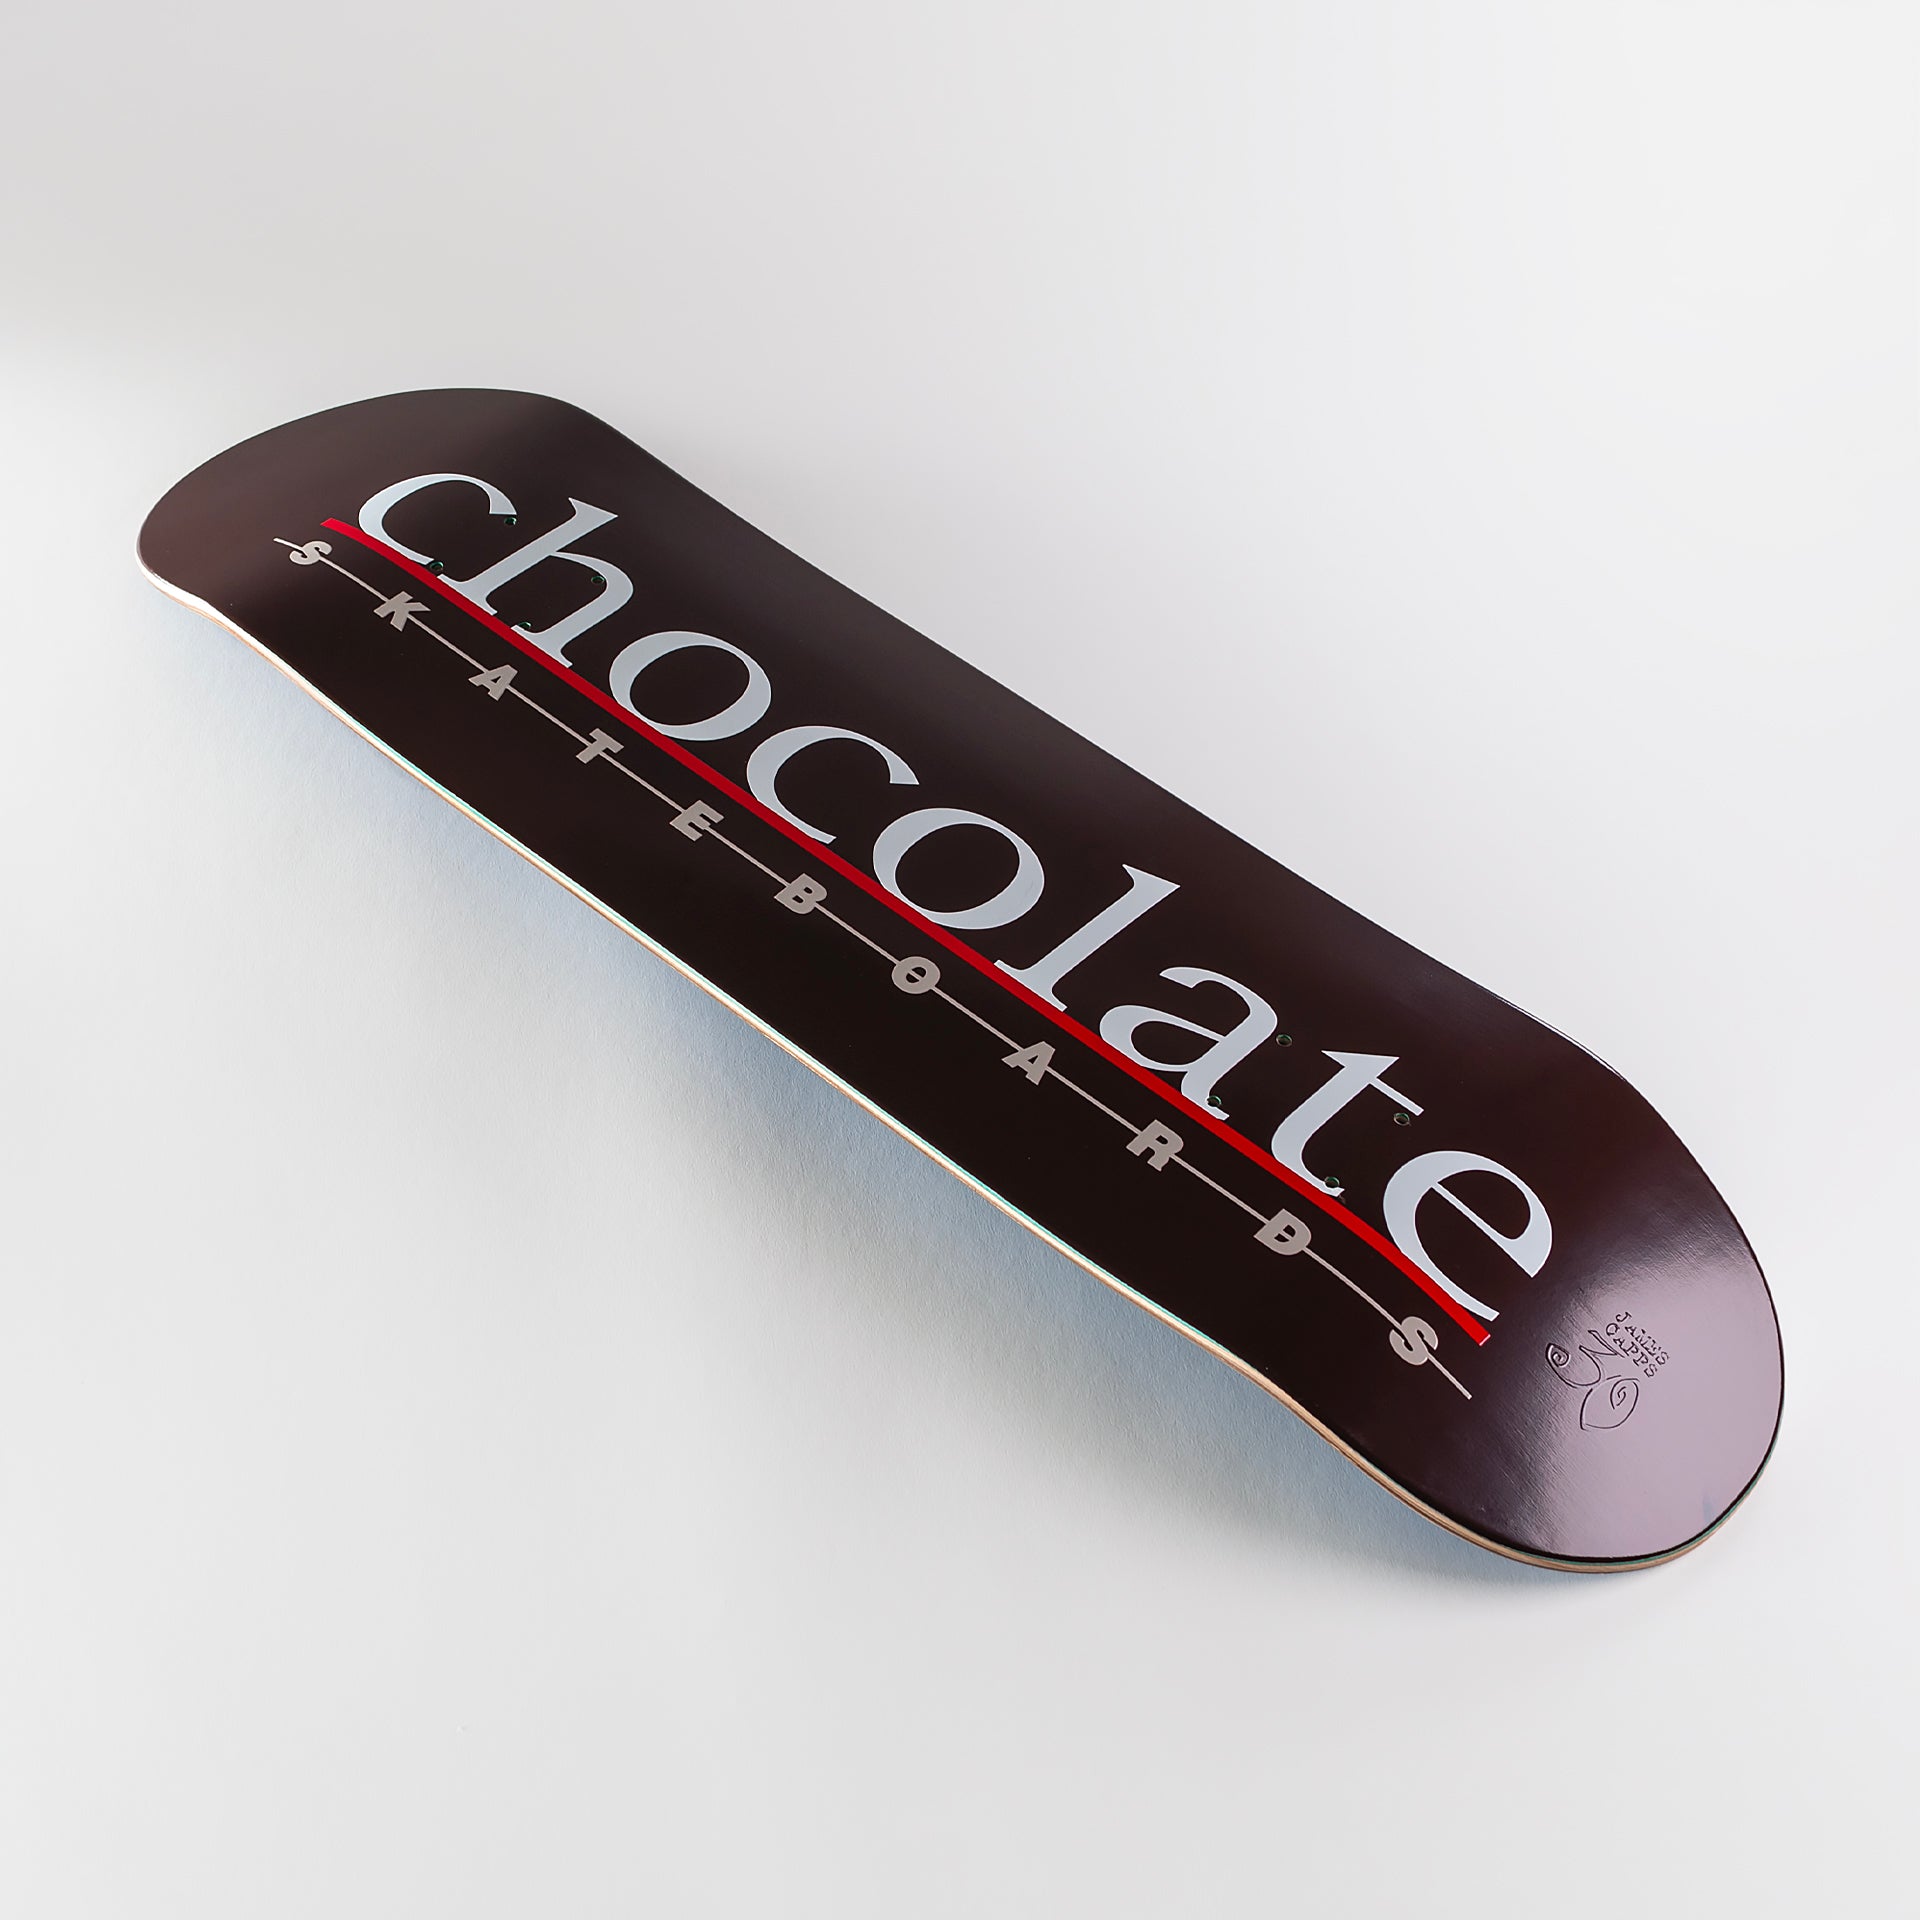 Chocolate 8" The Bar Logo James Capps Deck - Brown - Prime Delux Store